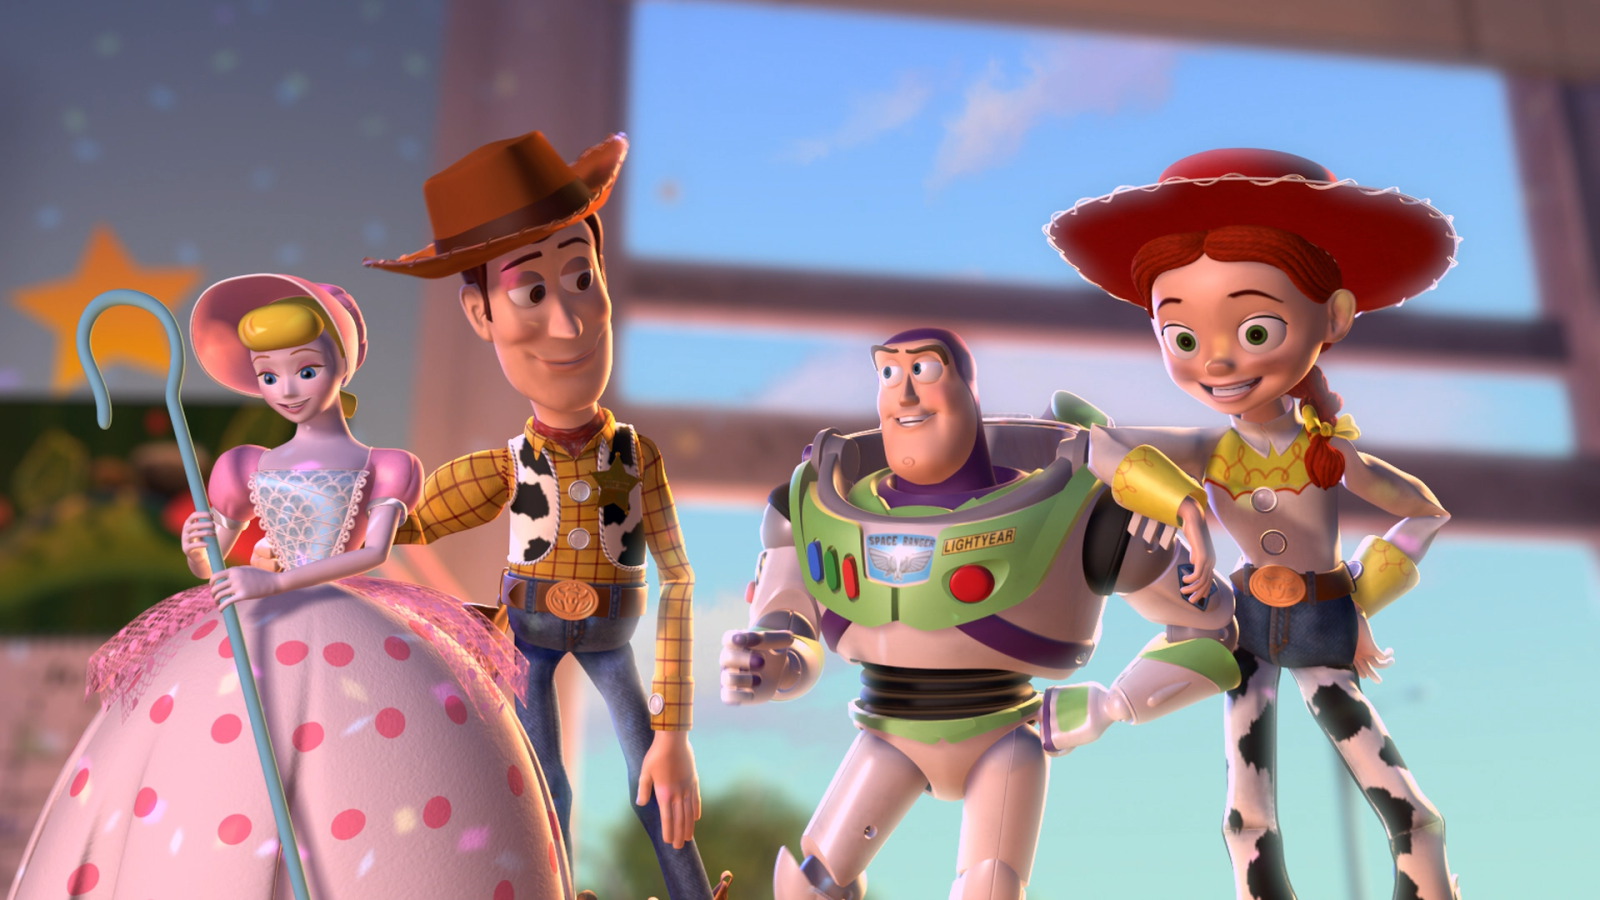 Toy Story Computer Wallpapers, Desktop Backgrounds | 1600x900 | ID ...